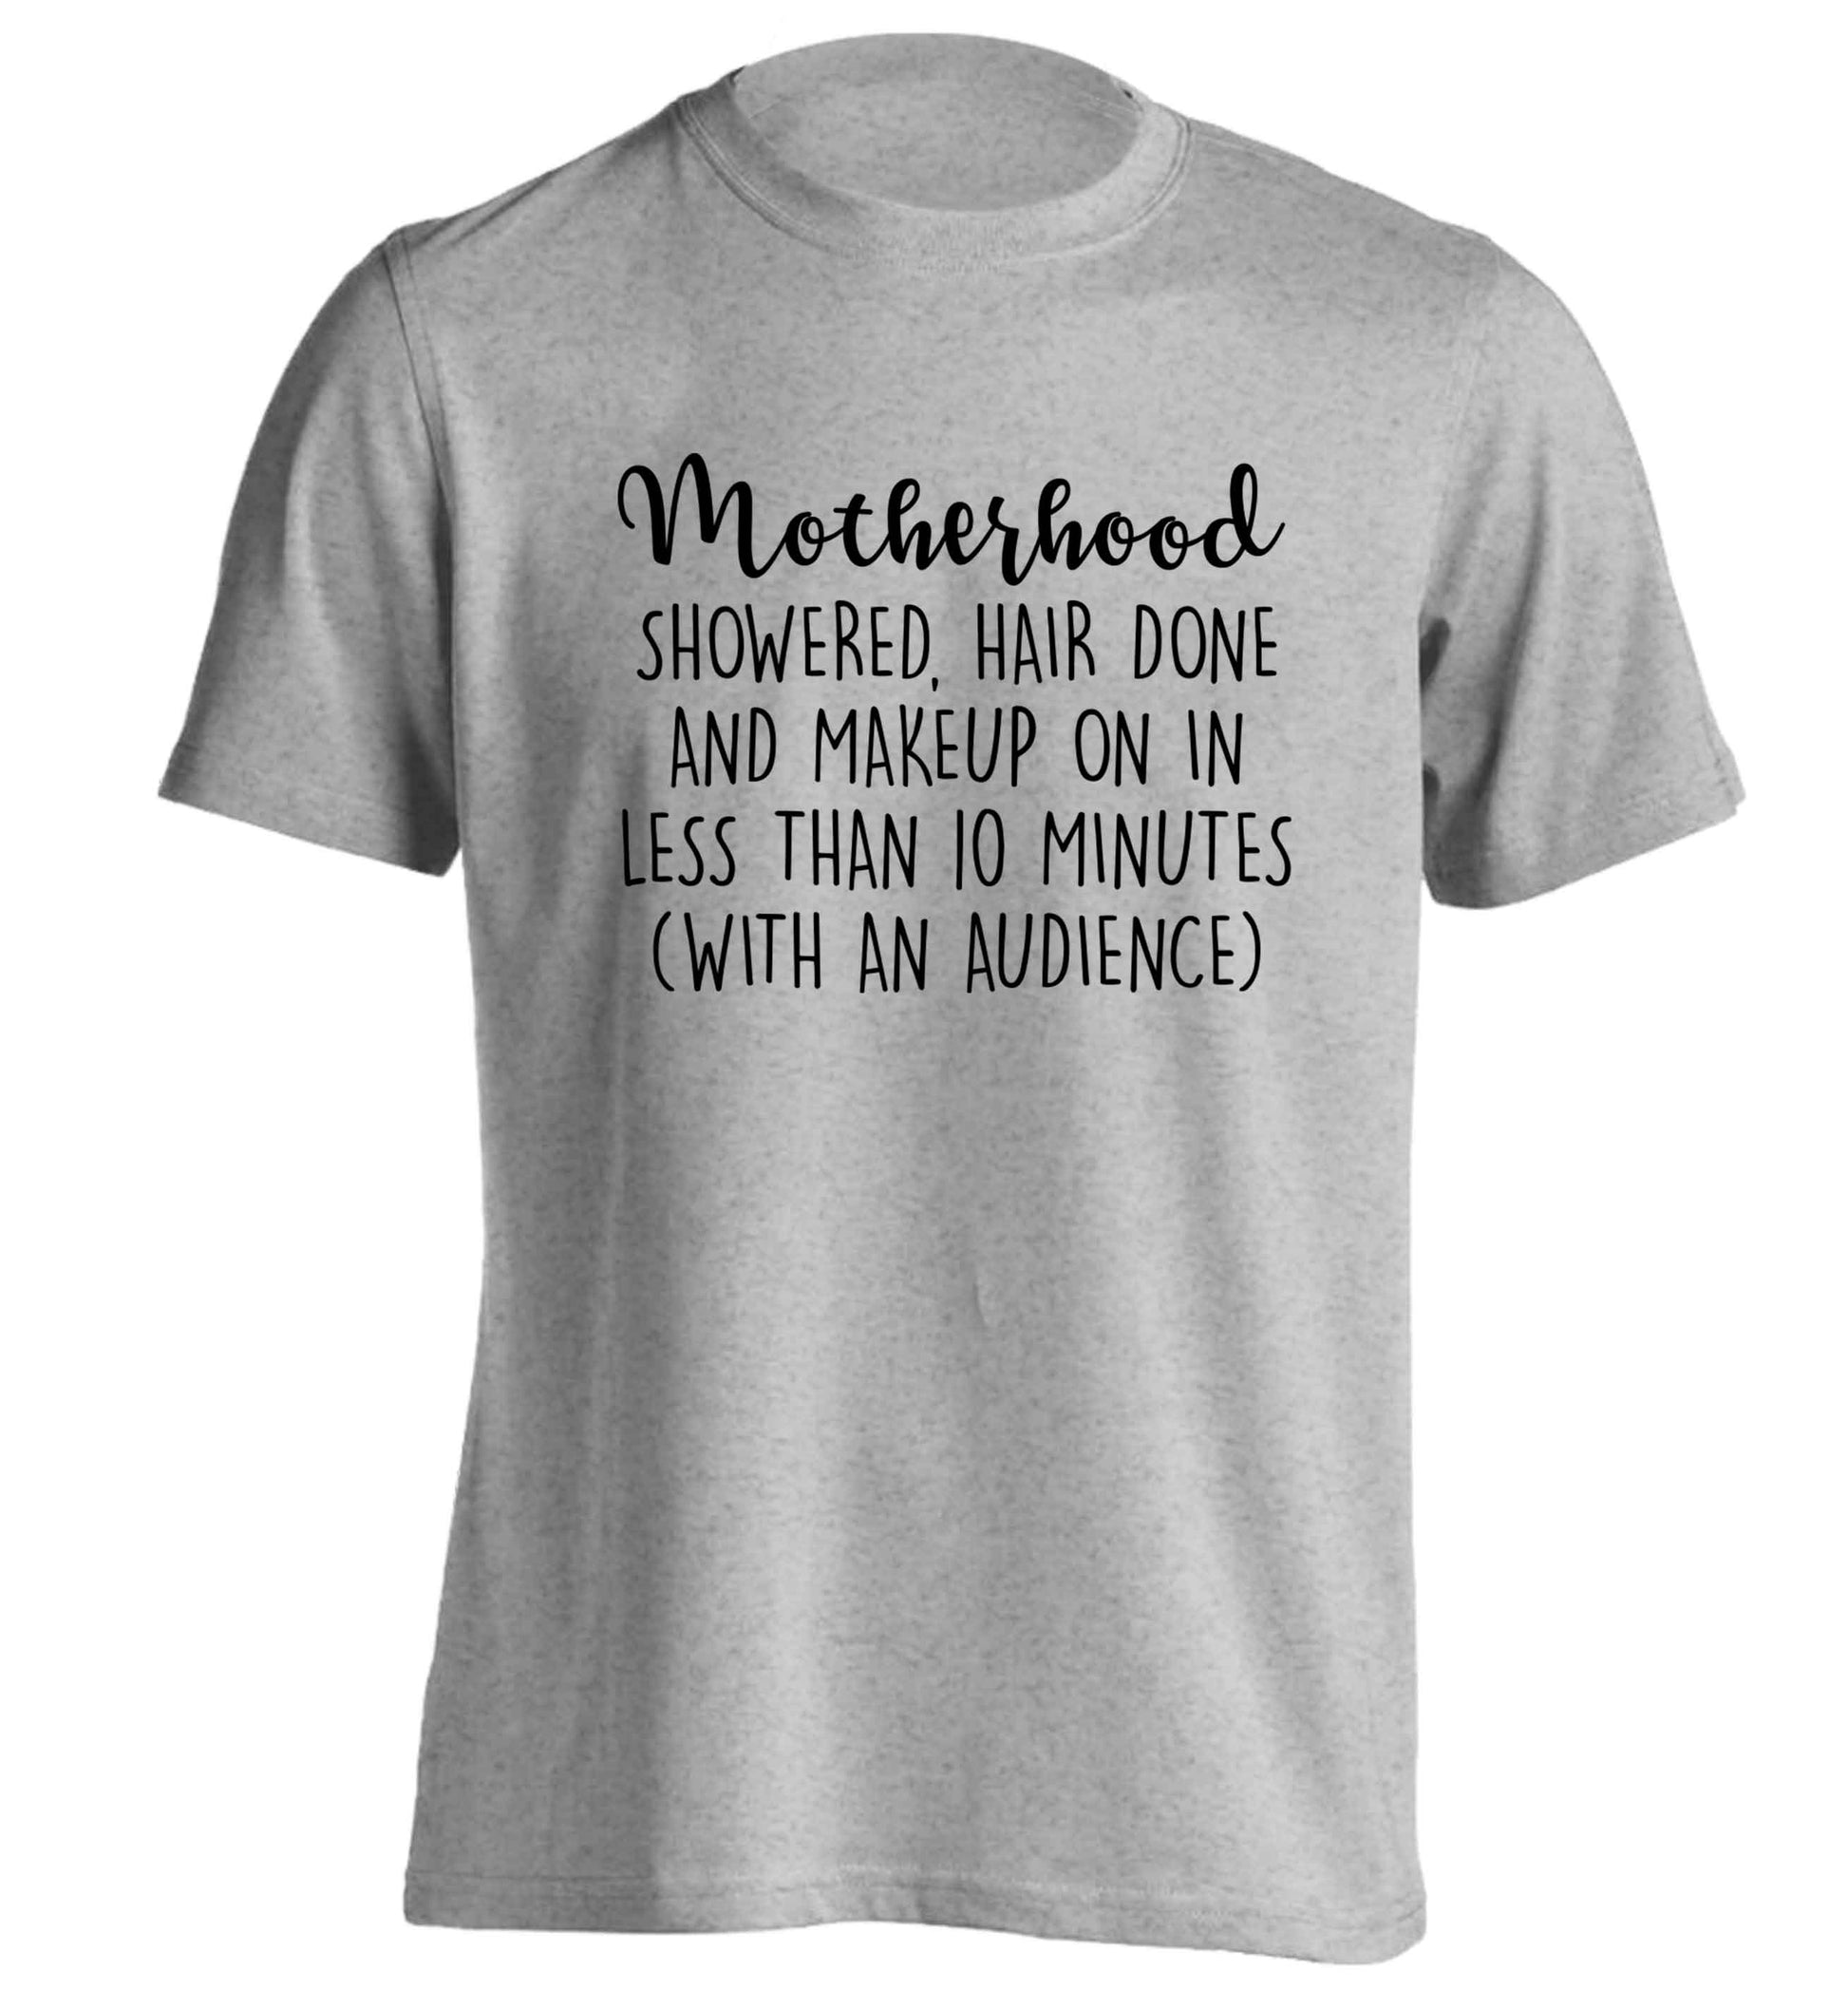 Motherhood, showered, hair done and makeup on adults unisex grey Tshirt 2XL